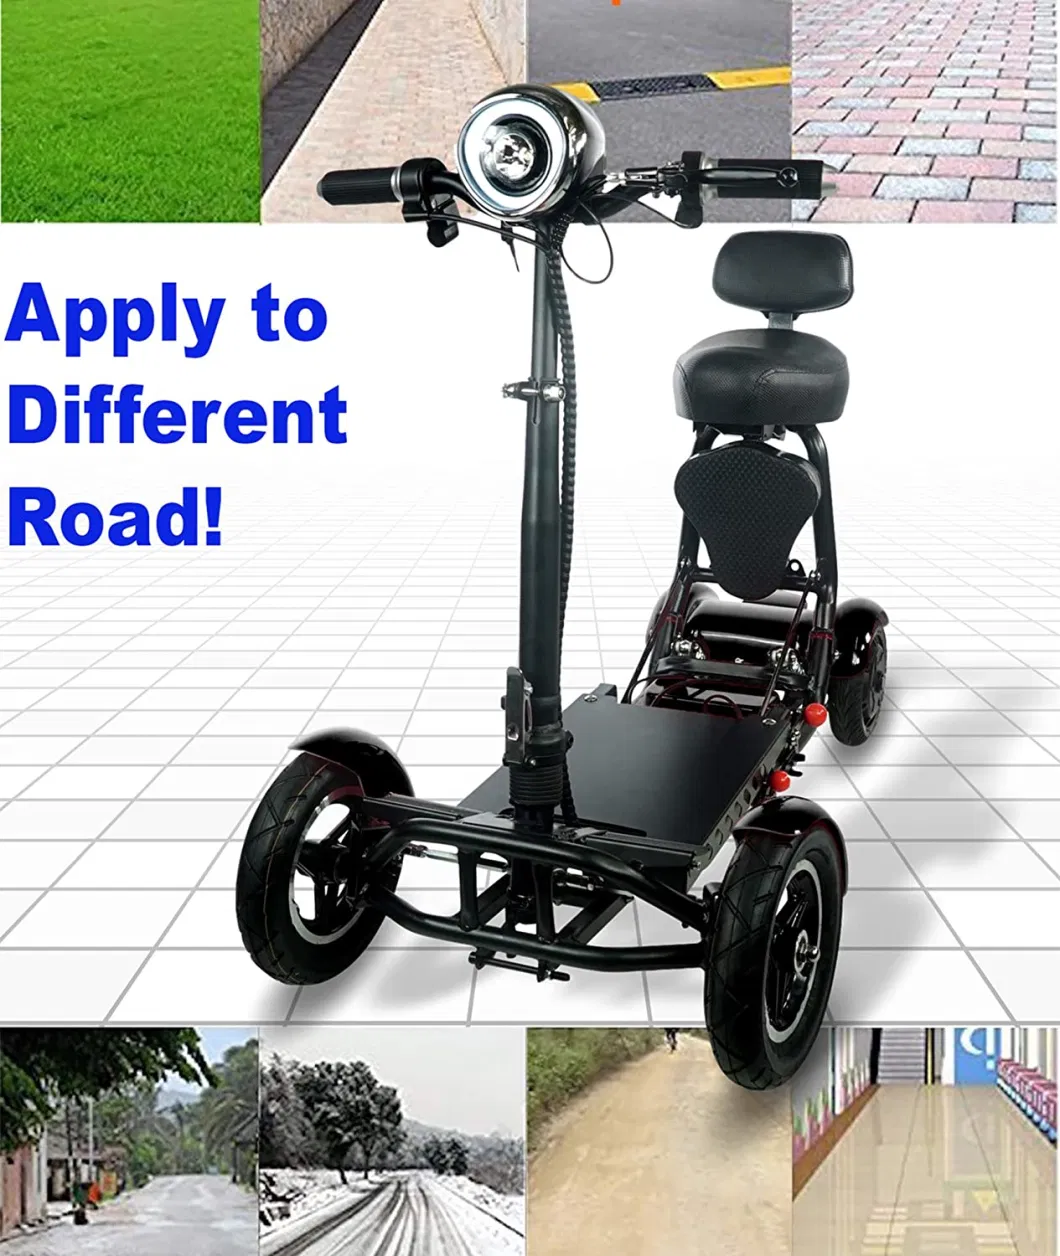 4 Wheel Dual Motor Mobility Folding Electric Scooter Bike for Adult People